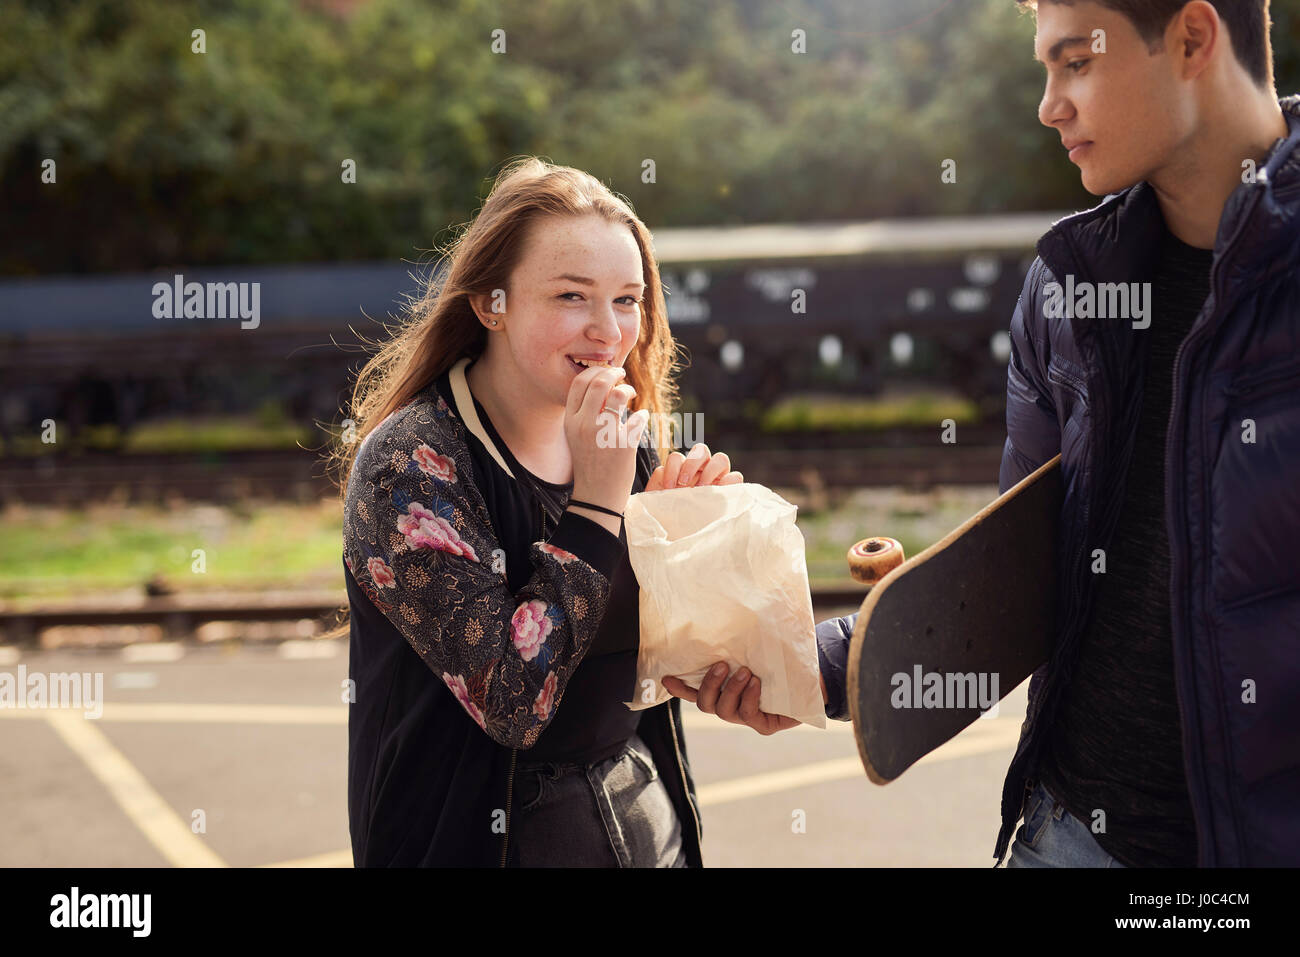 Young man sharing bag of chips with young woman,  skateboard under young man's arm, Bristol, UK Stock Photo